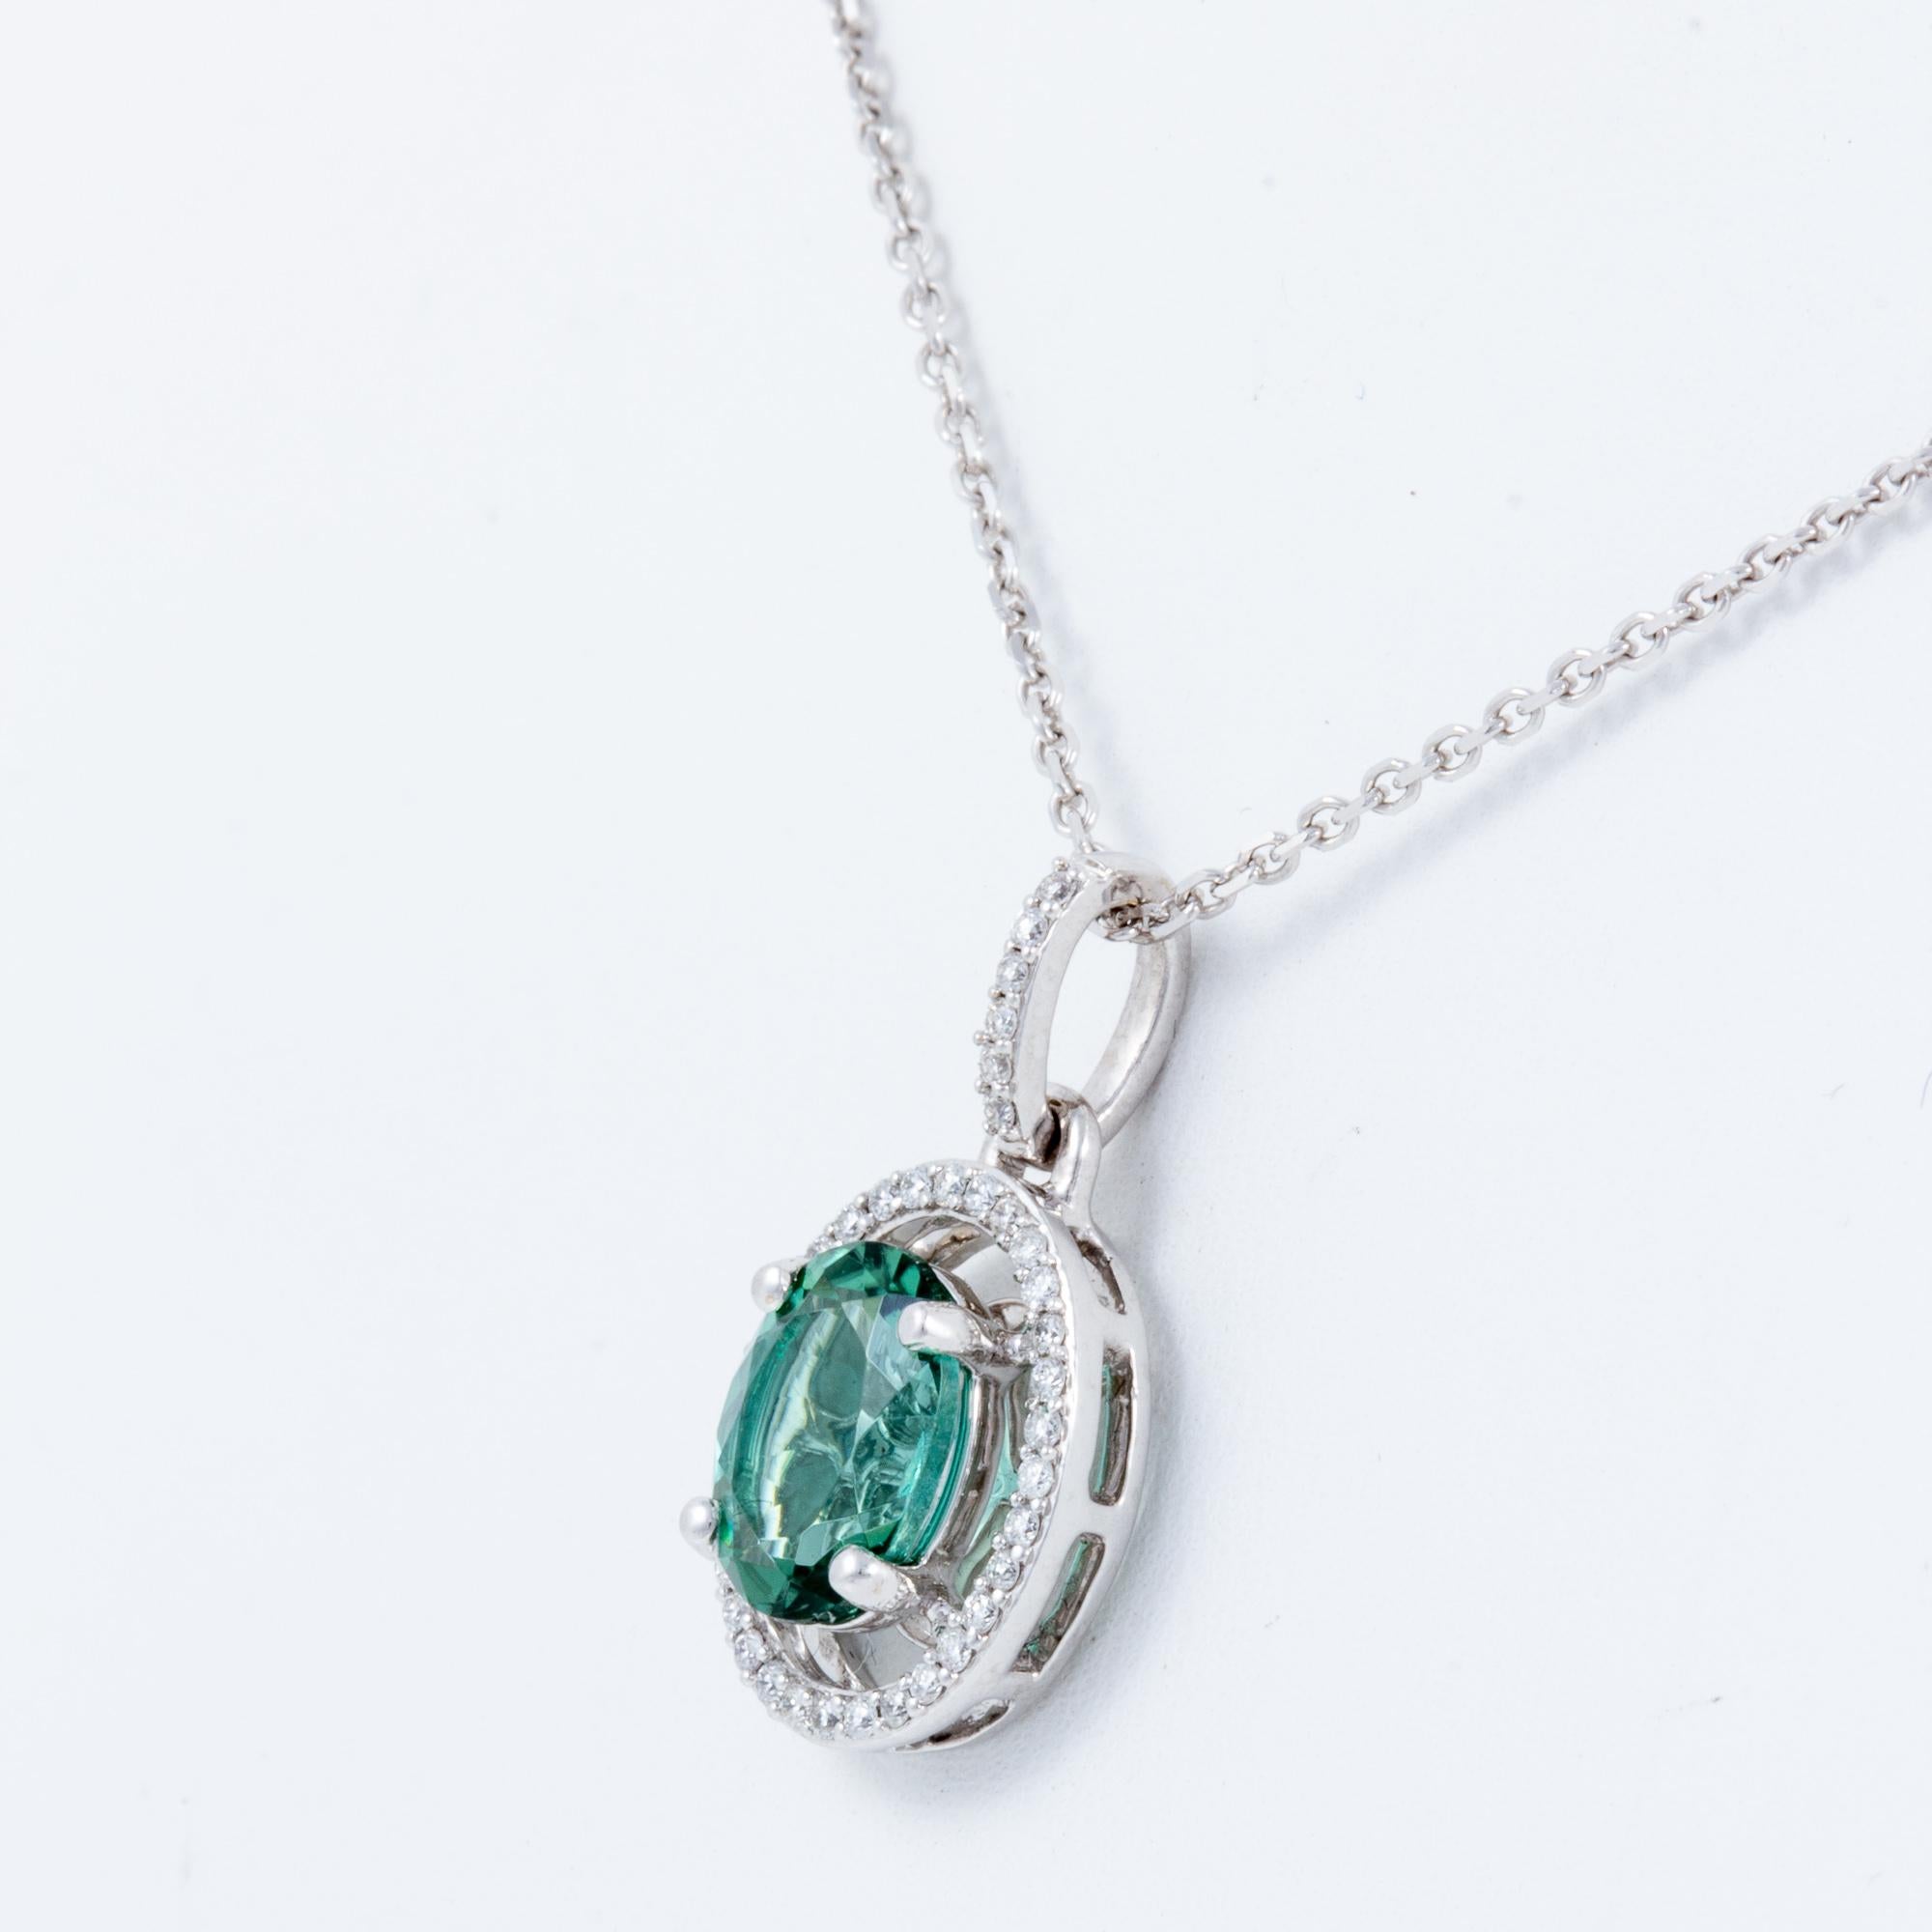 1.26ct. blue green tourmaline set in 14kt white gold with .13 ctw diamonds on a 16